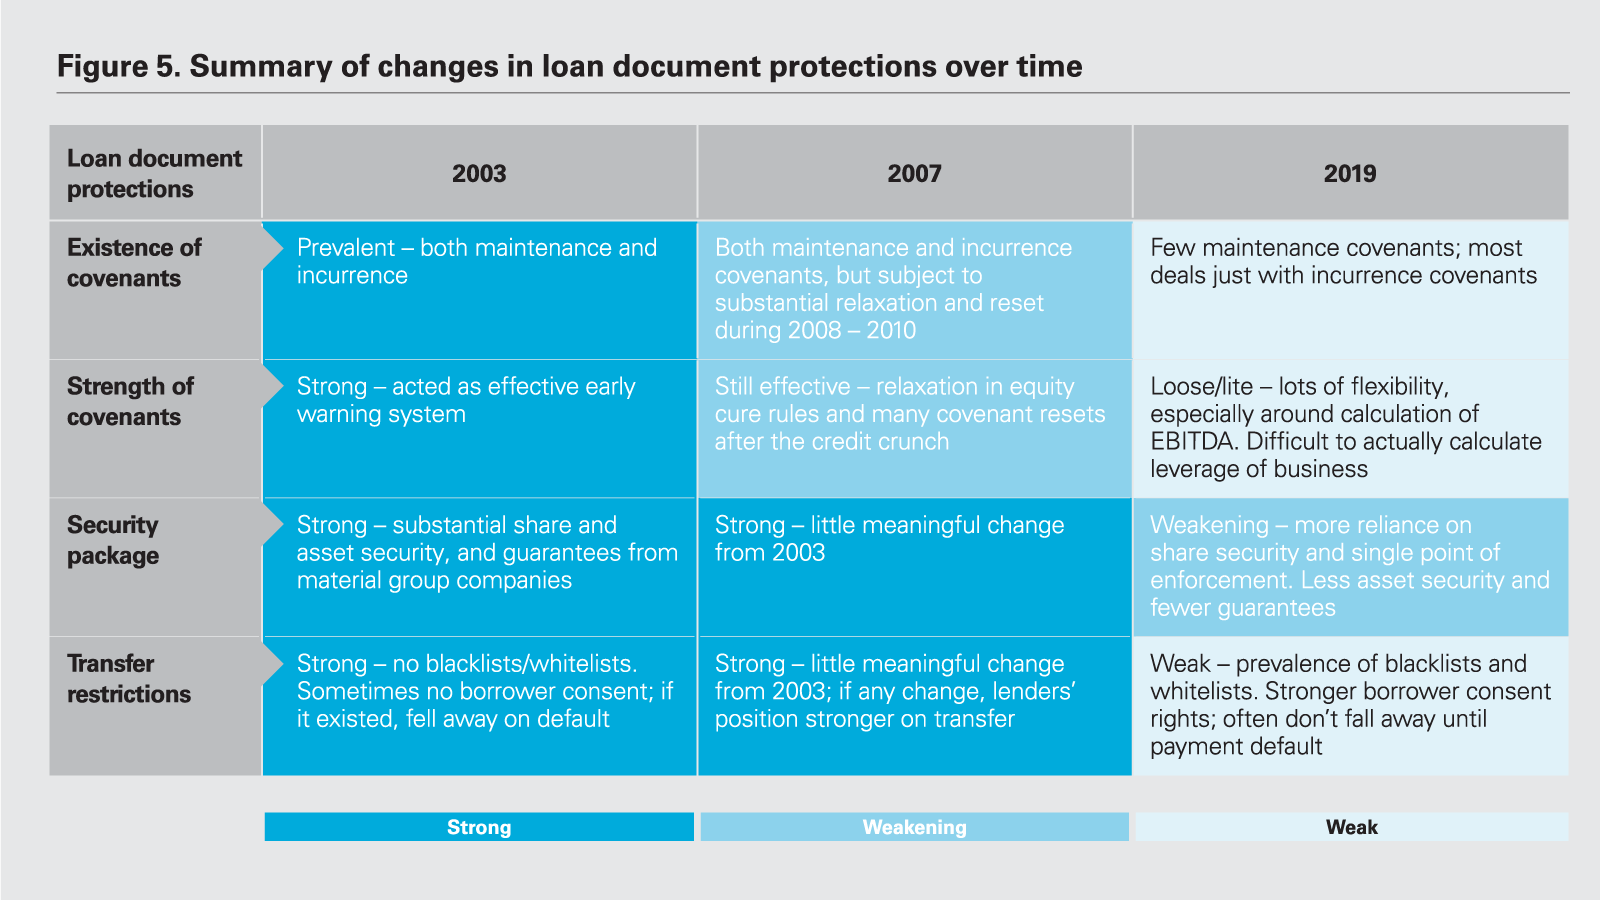 Summary of changes in loan document protections over time chart